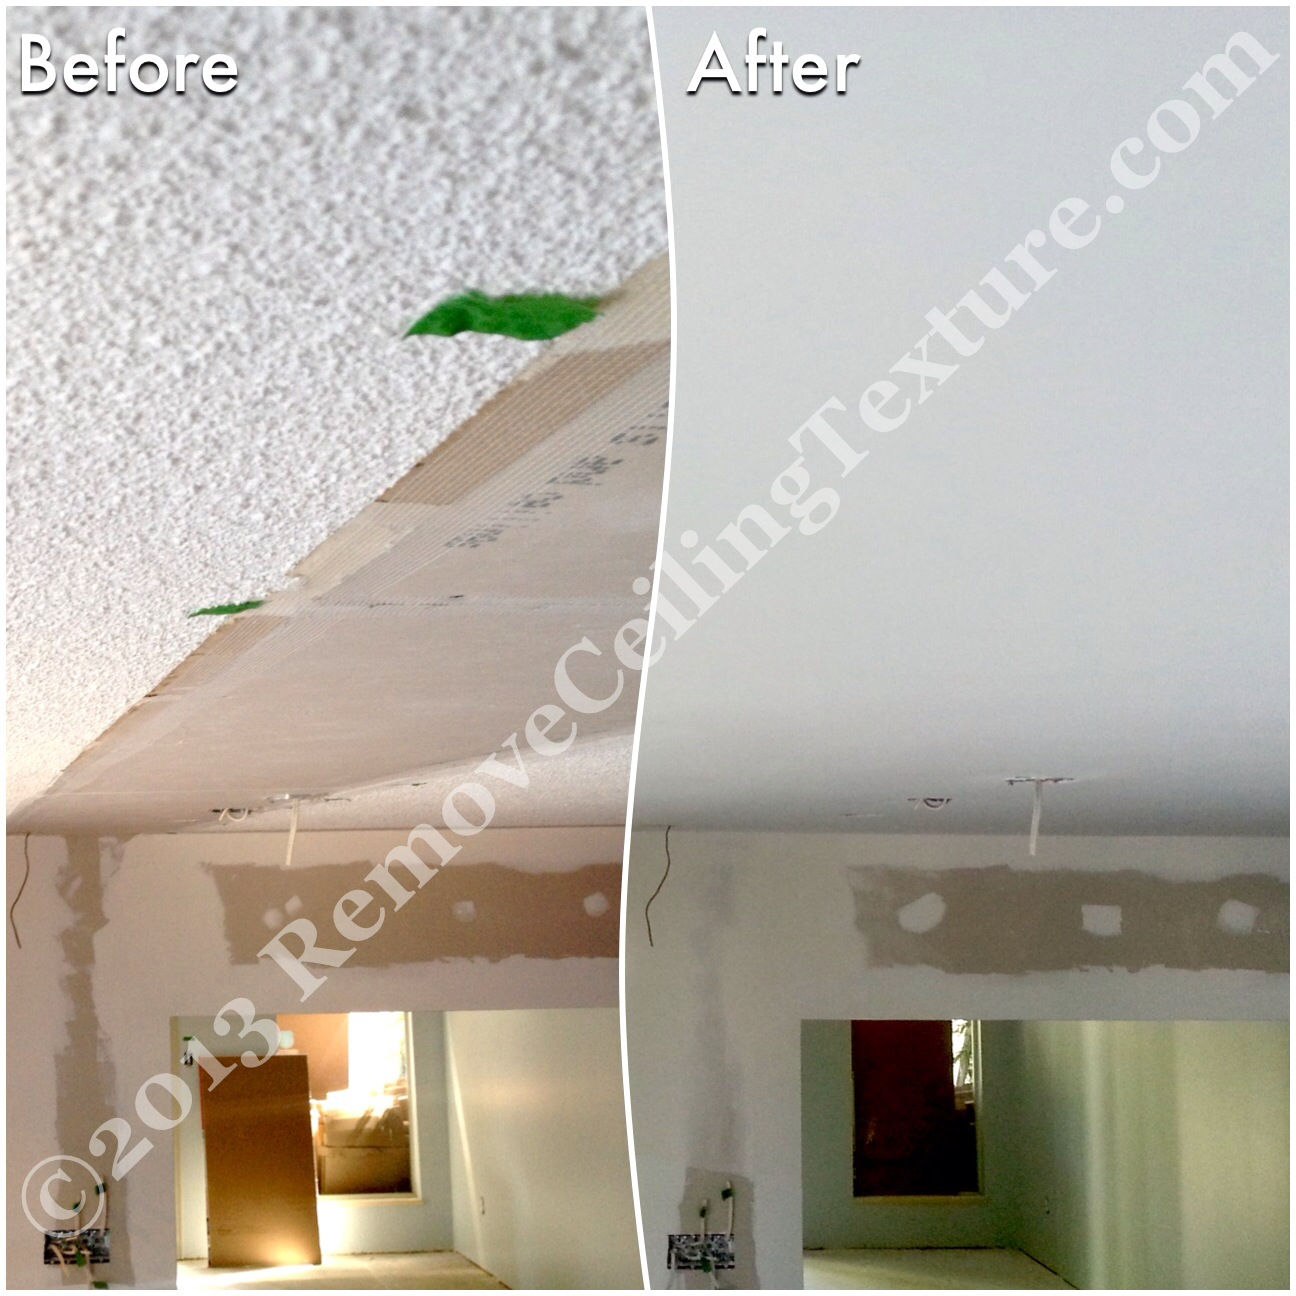 It's nearly impossible to match existing ceiling texture. The homeowners went with smooth ceilings instead.